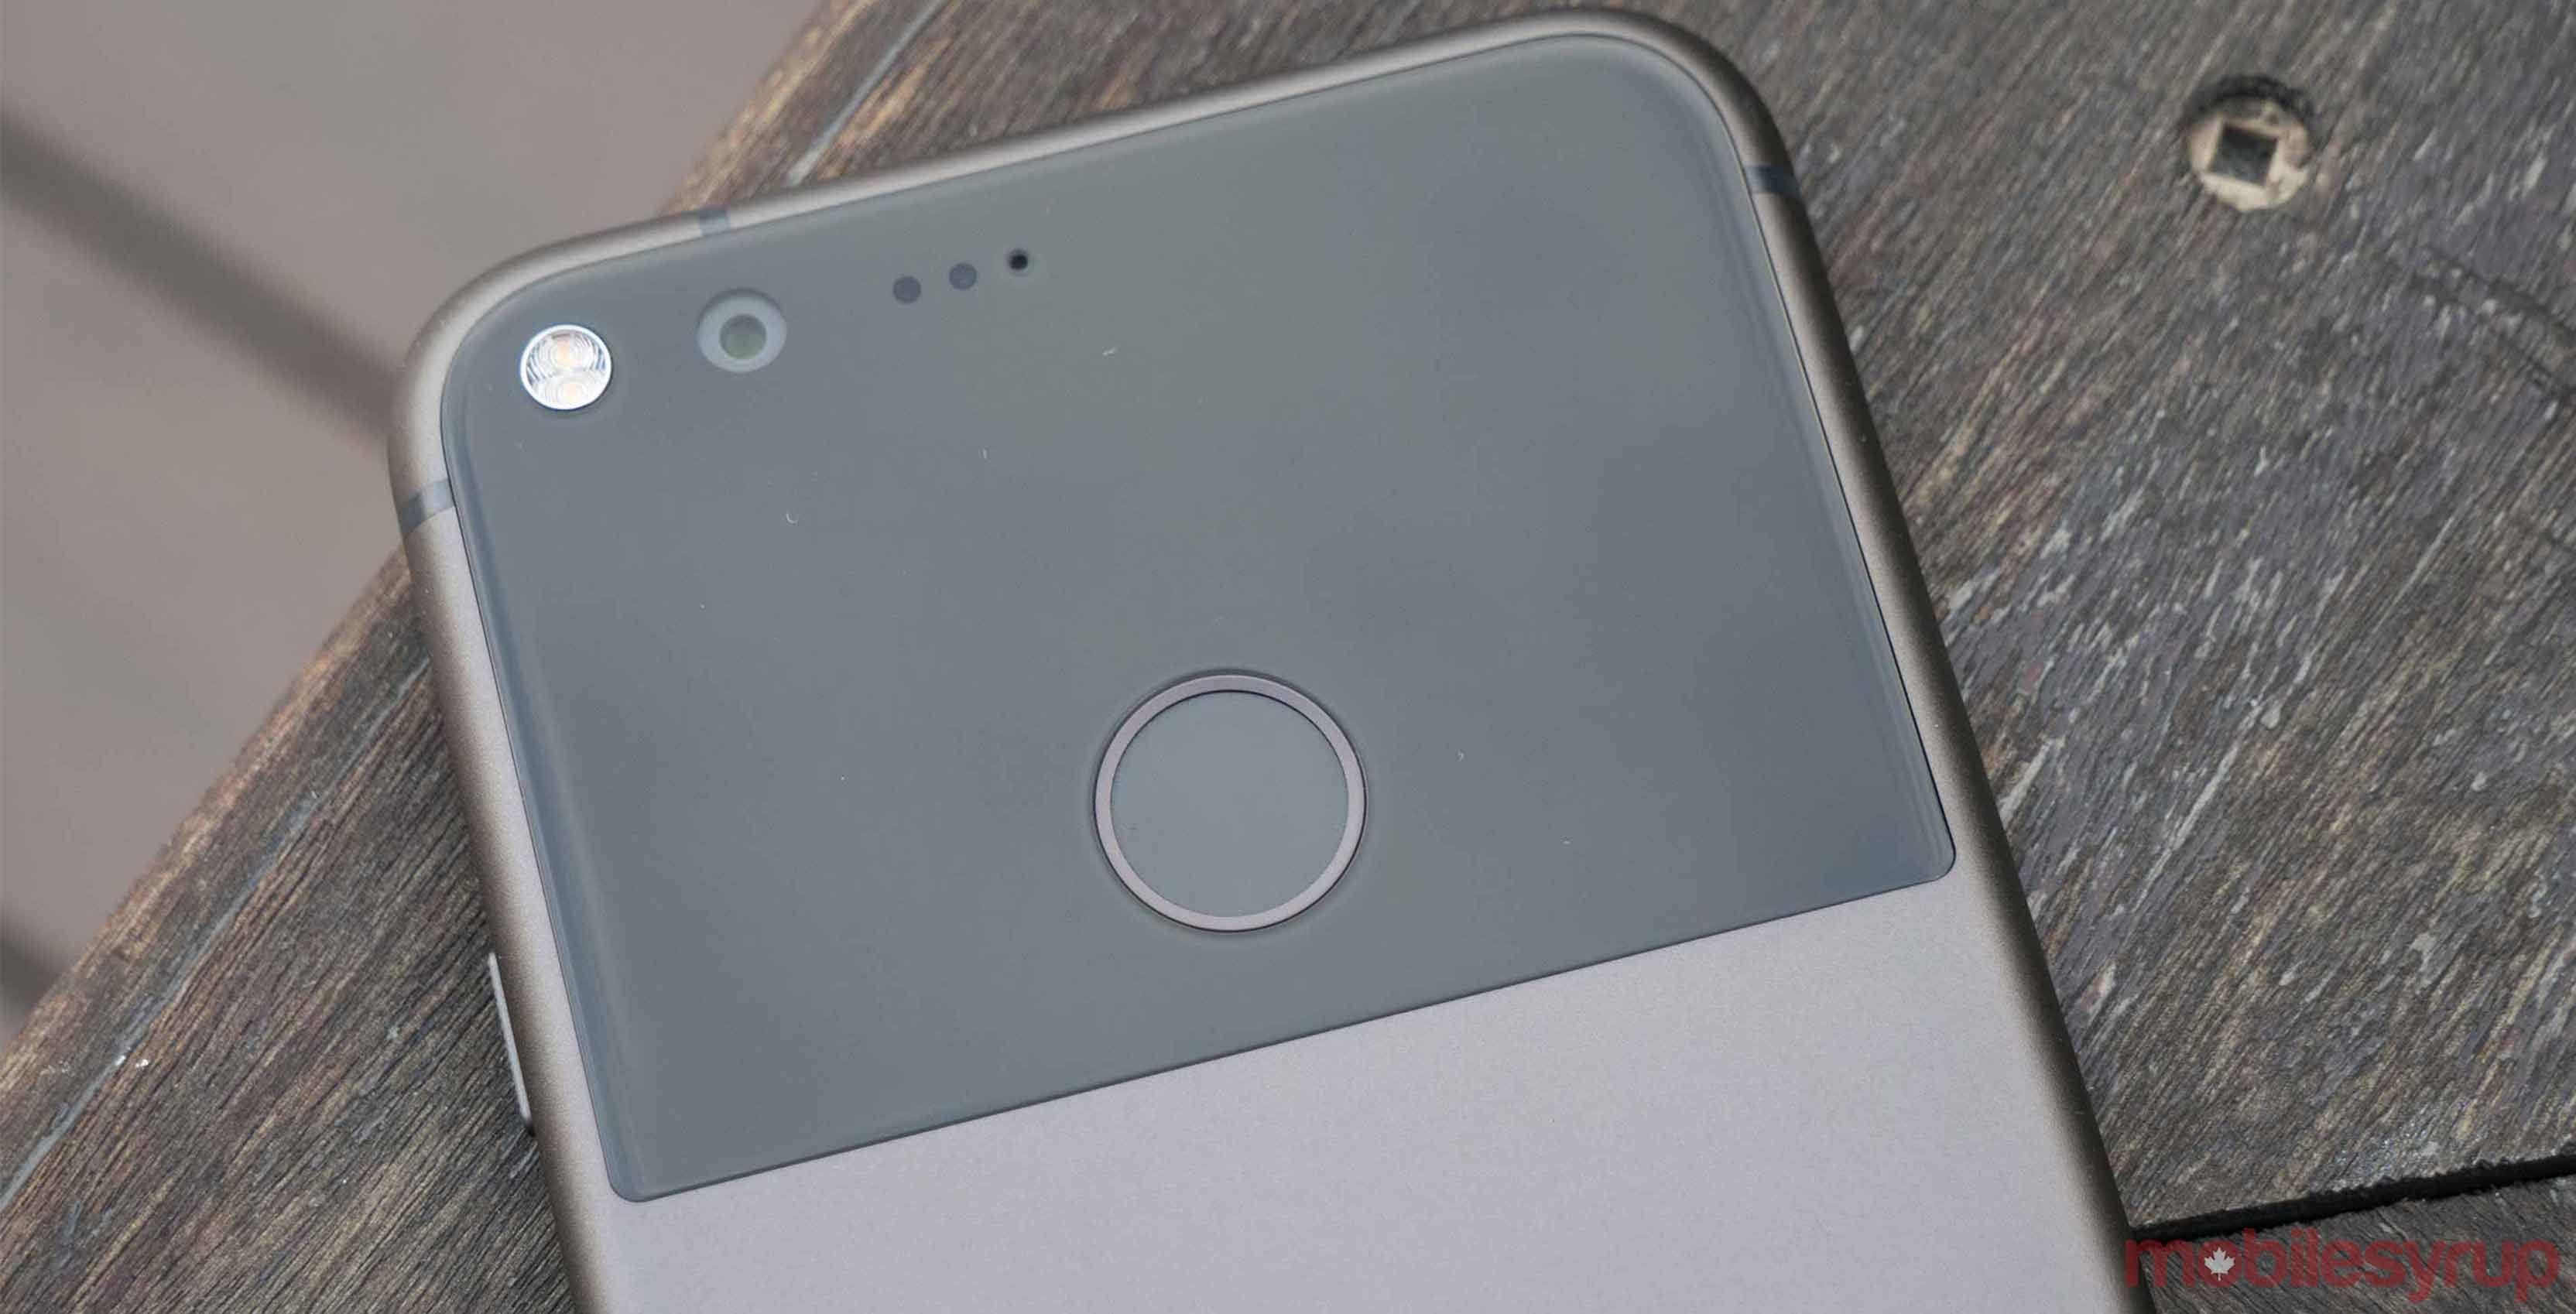 The back of the Google Pixel